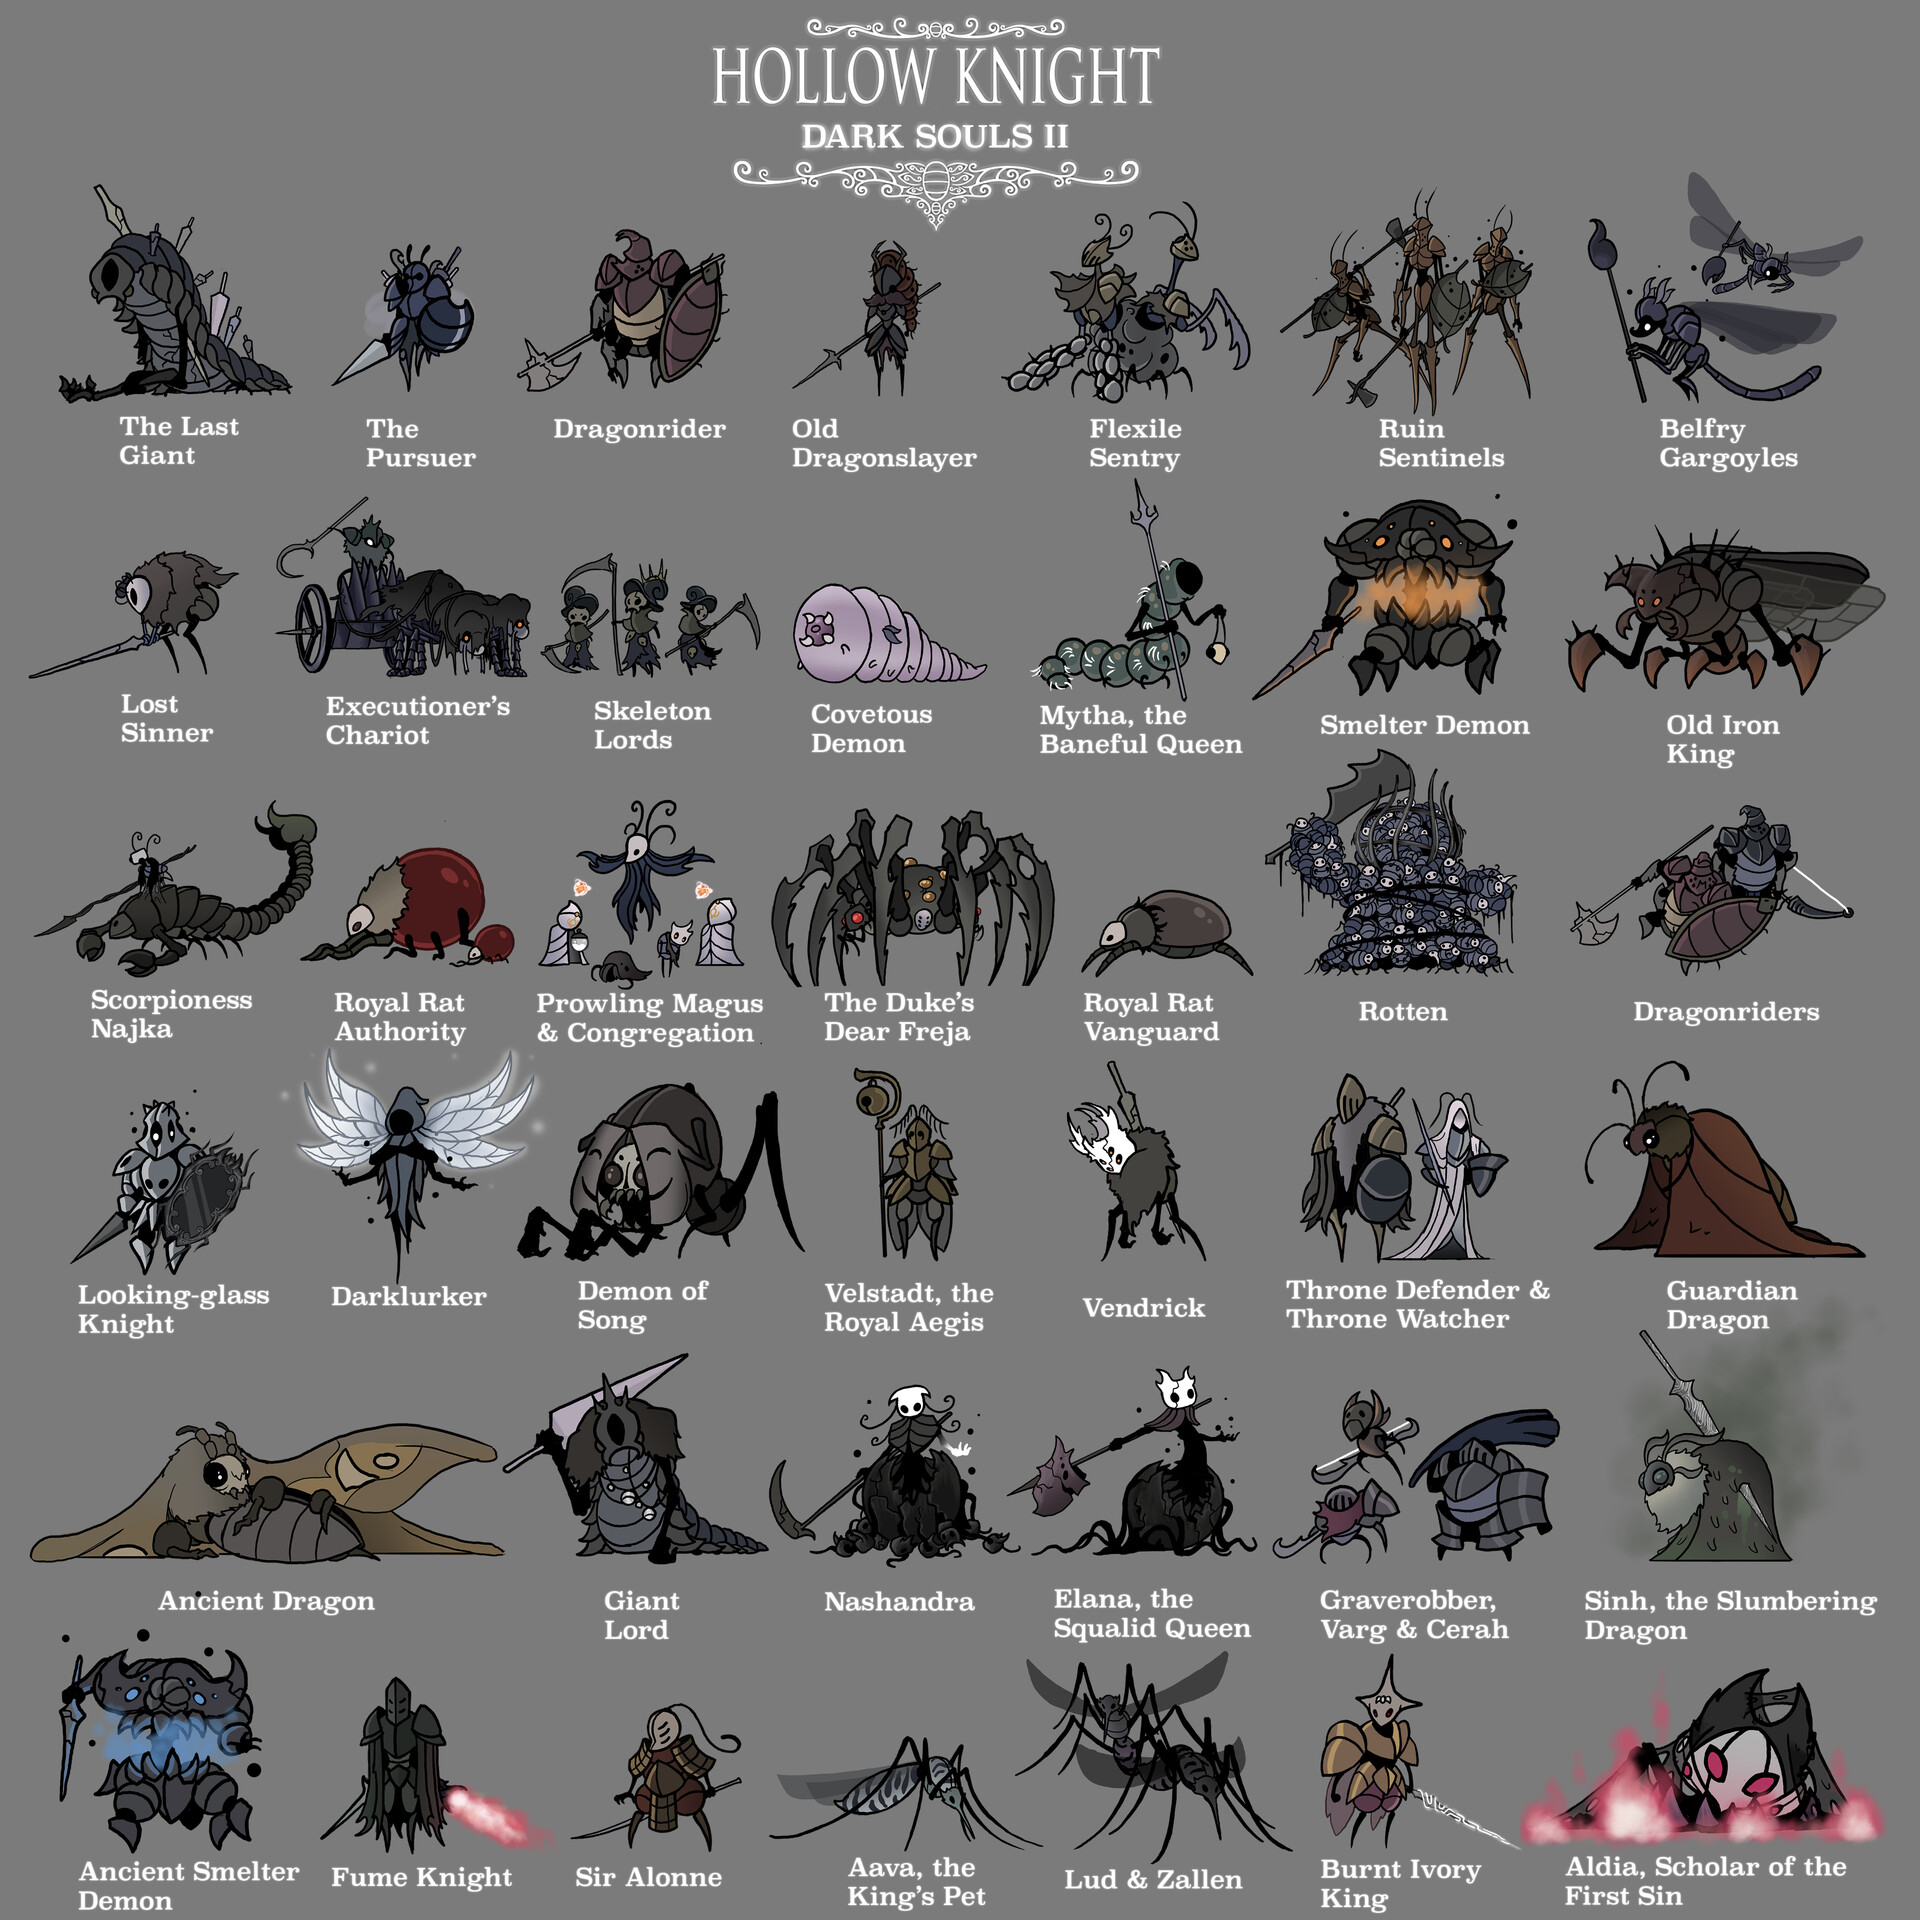 ArtStation - From Software Bosses as Hollow Knight characters